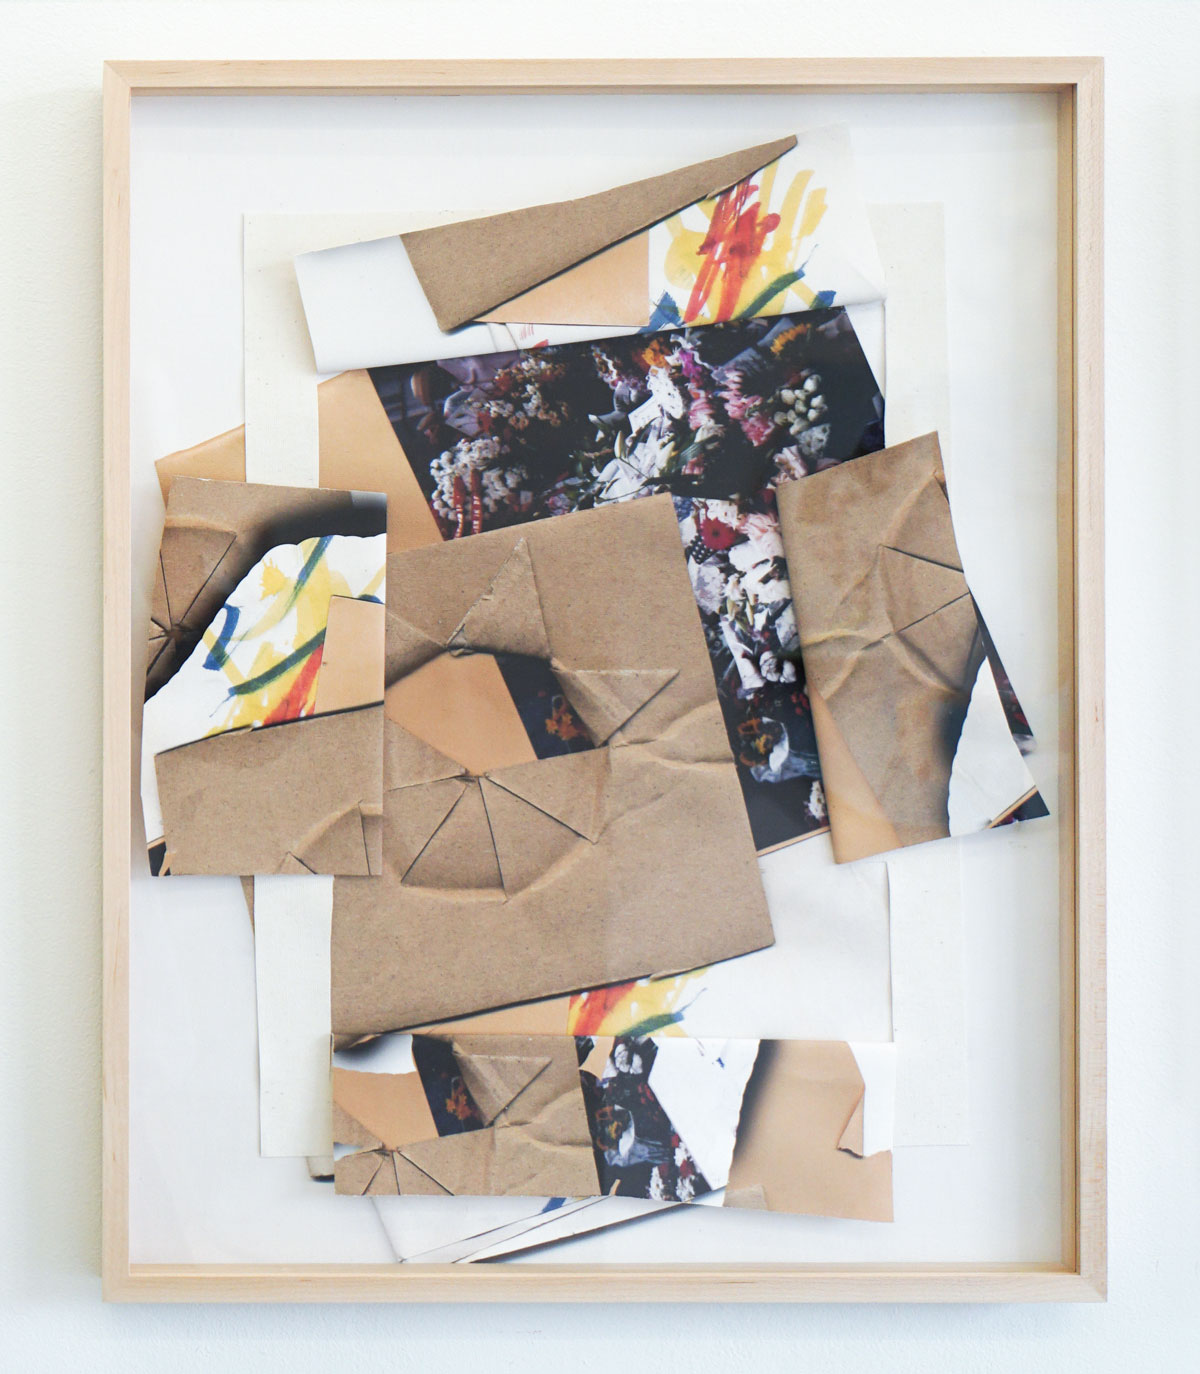 Light wood frame around a mixed media work, collaged images of brown paper cut and folded in a star pattern, childlike marker drawings and a photograph.